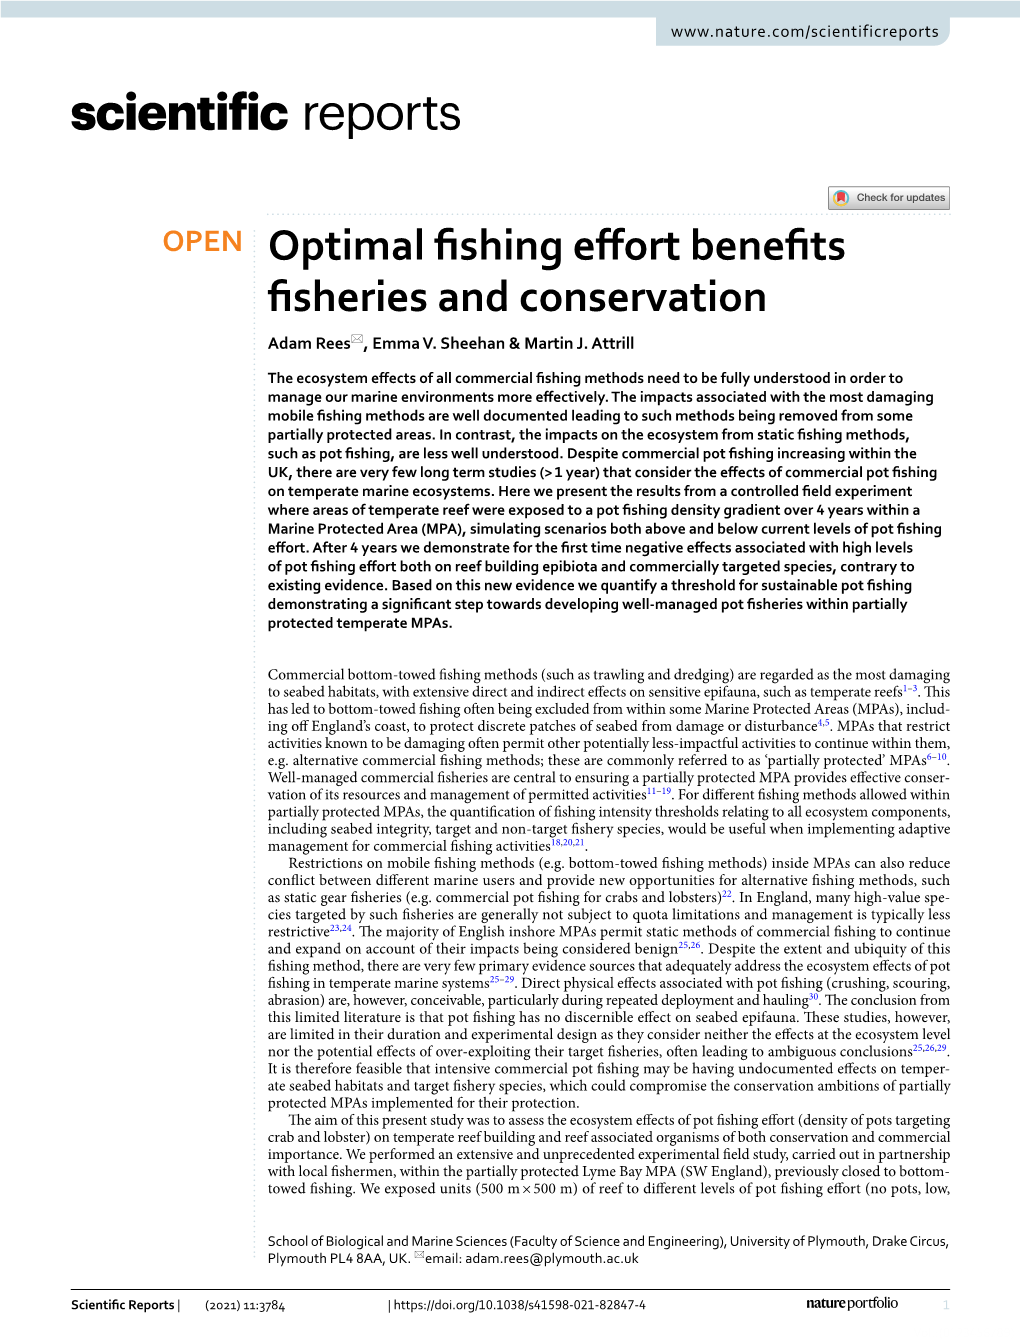 Optimal Fishing Effort Benefits Fisheries and Conservation